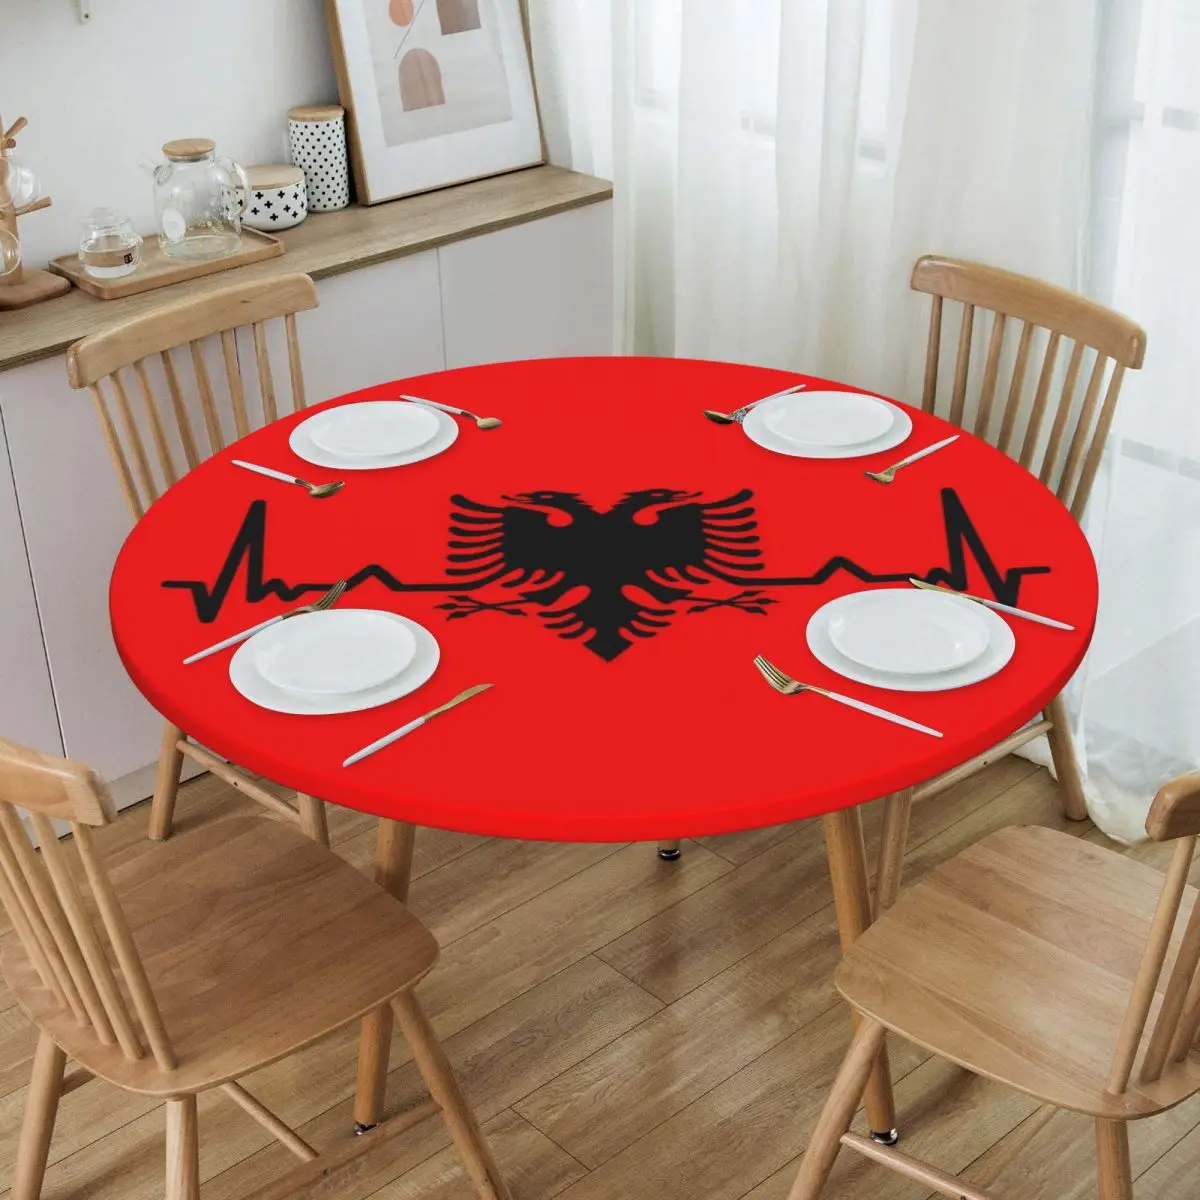 

Round Fitted Heartbeat Albania Flag Table Cloth Oilproof Tablecloth 45"-50" Table Cover Backed with Elastic Edge